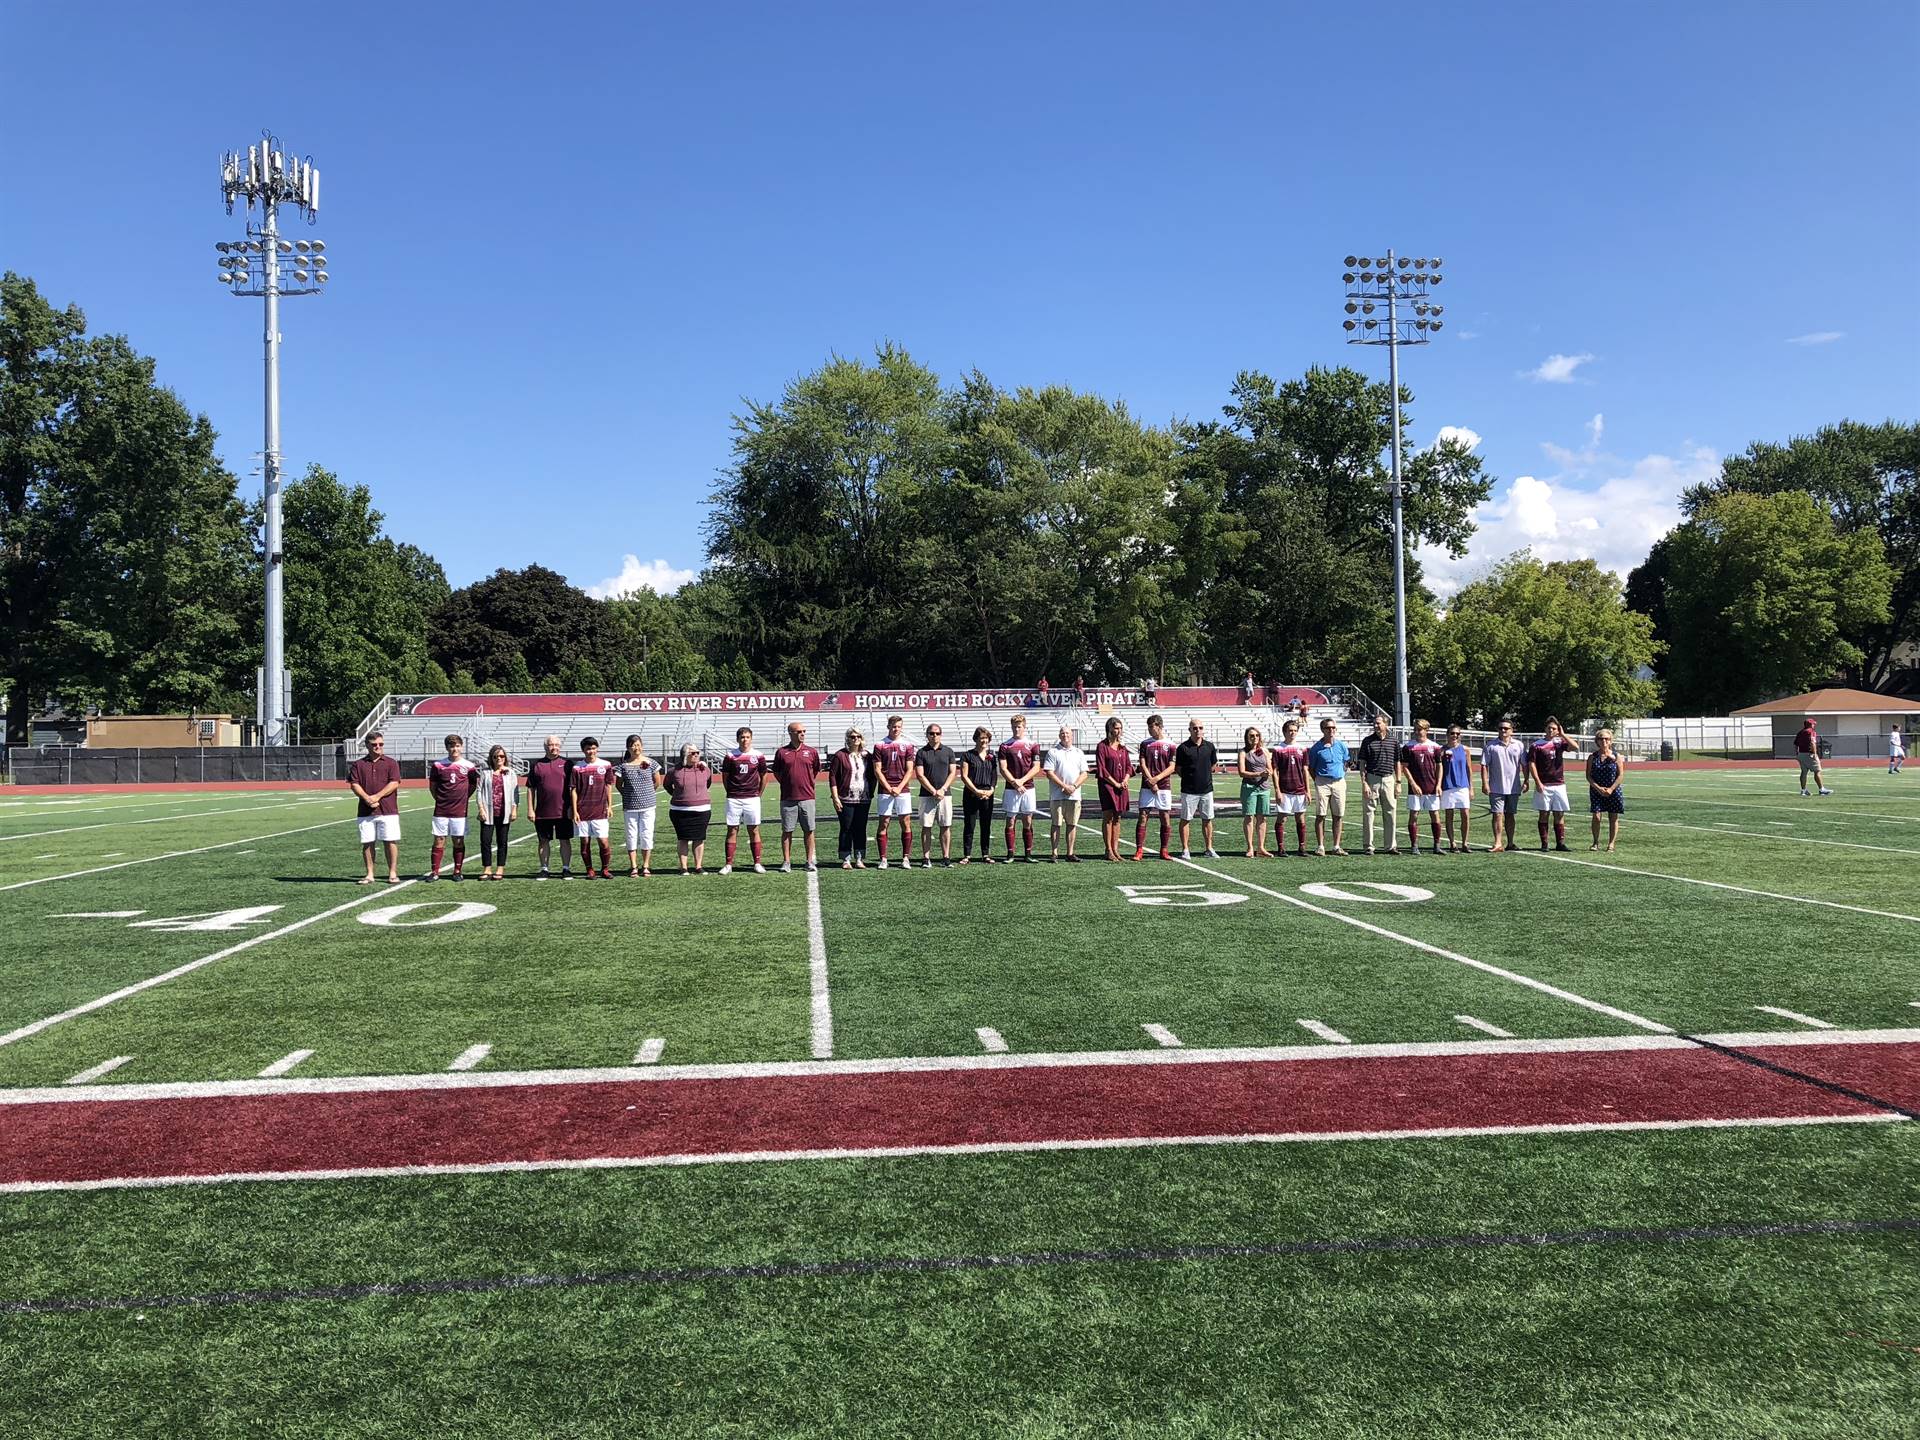 Group photo from our Senior Day 2018 on 15 September when we hosted Bishop Watterson HS from Columbu